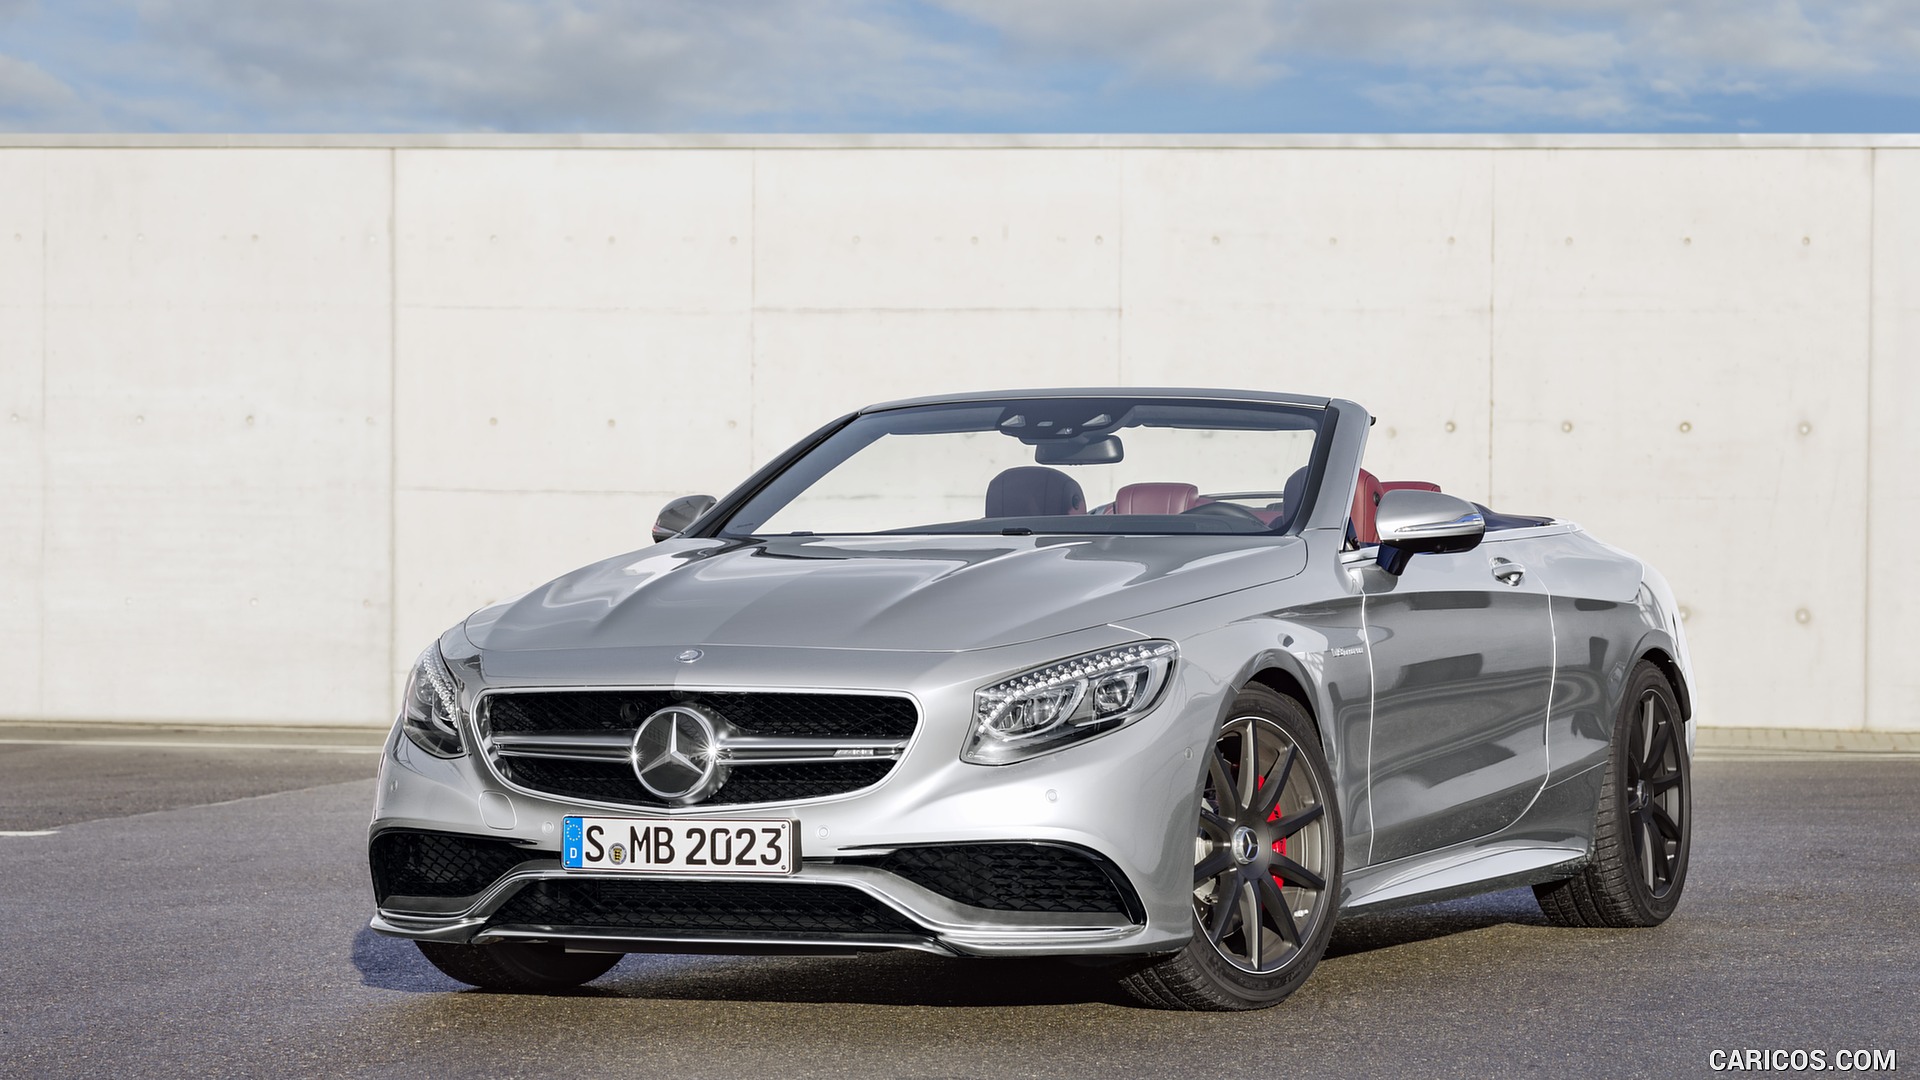 2017 Mercedes-AMG S63 Cabriolet Edition 130